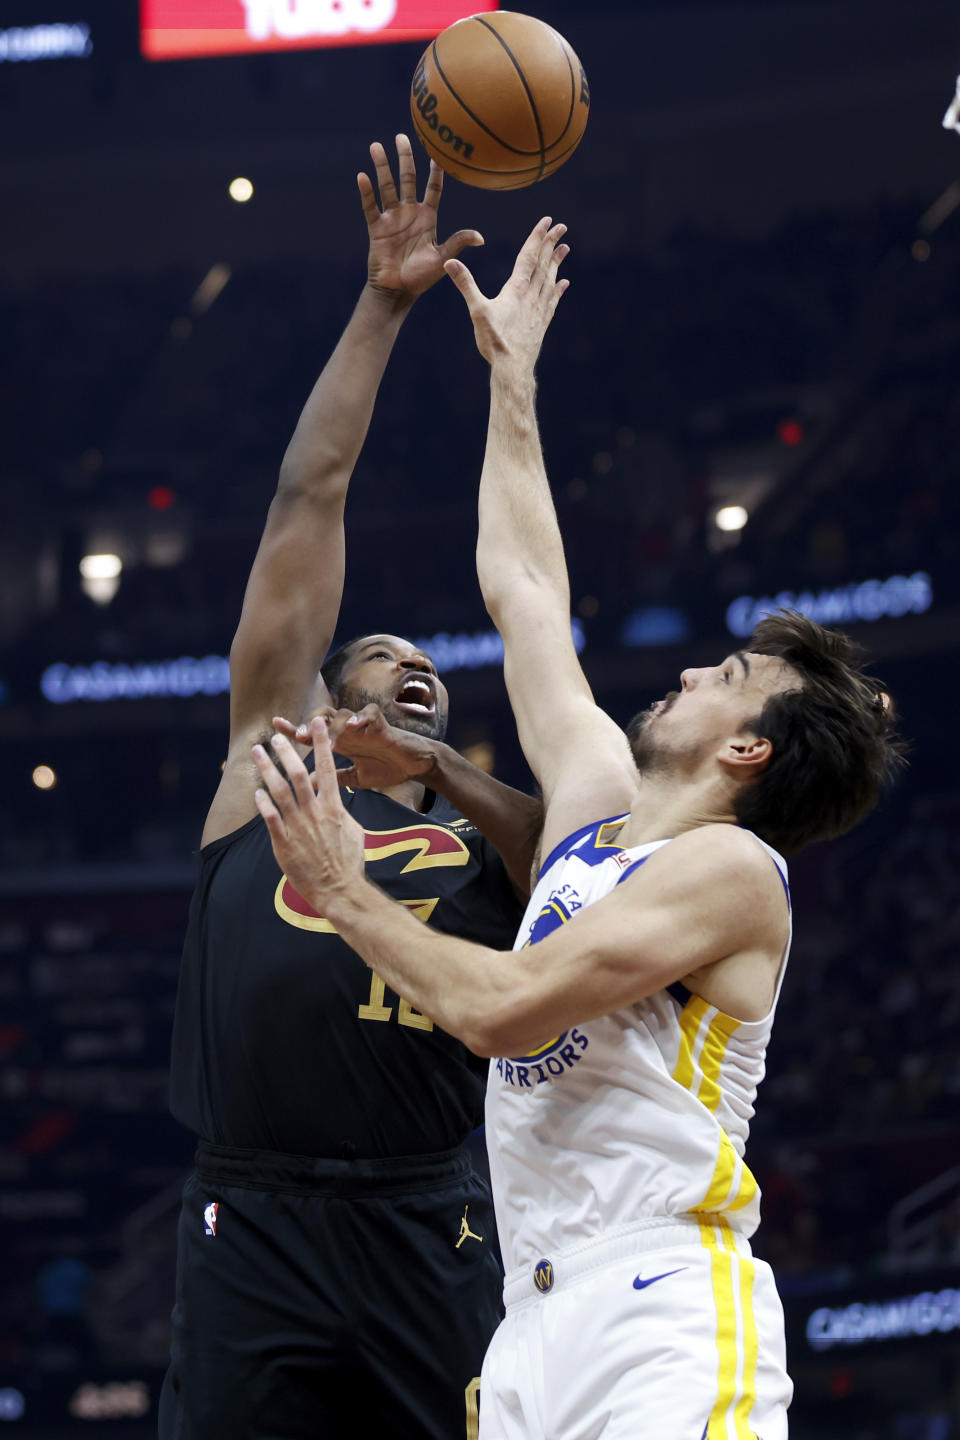 Cleveland Cavaliers center Tristan Thompson, left, shoots against Golden State Warriors forward Dario Saric, right, during the first half of an NBA basketball game, Sunday, Nov. 5, 2023, in Cleveland. (AP Photo/Ron Schwane)